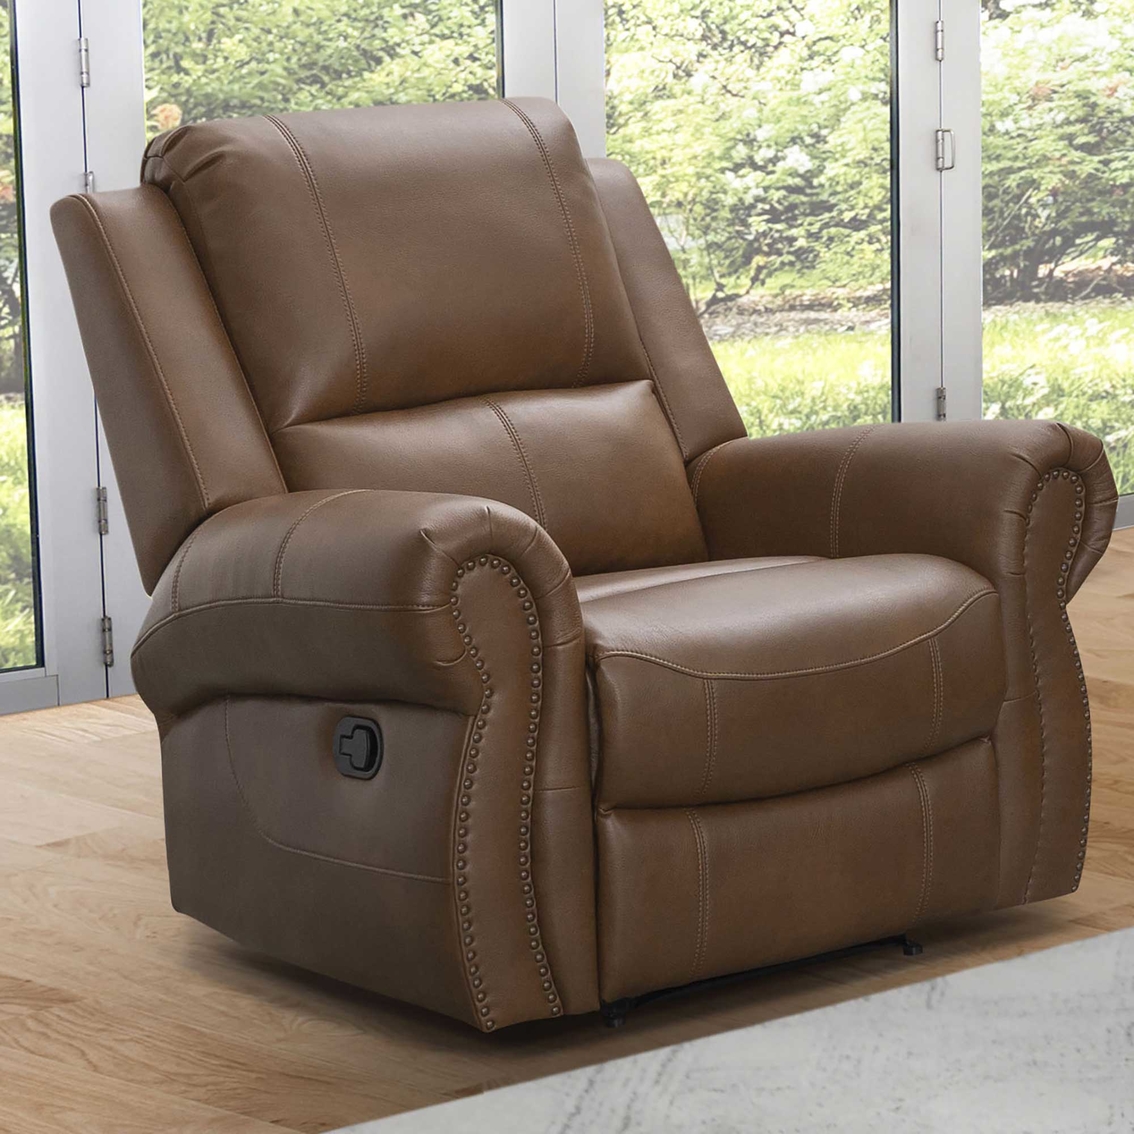 Abbyson Warren Reclining Sofa and Chair - Image 3 of 8